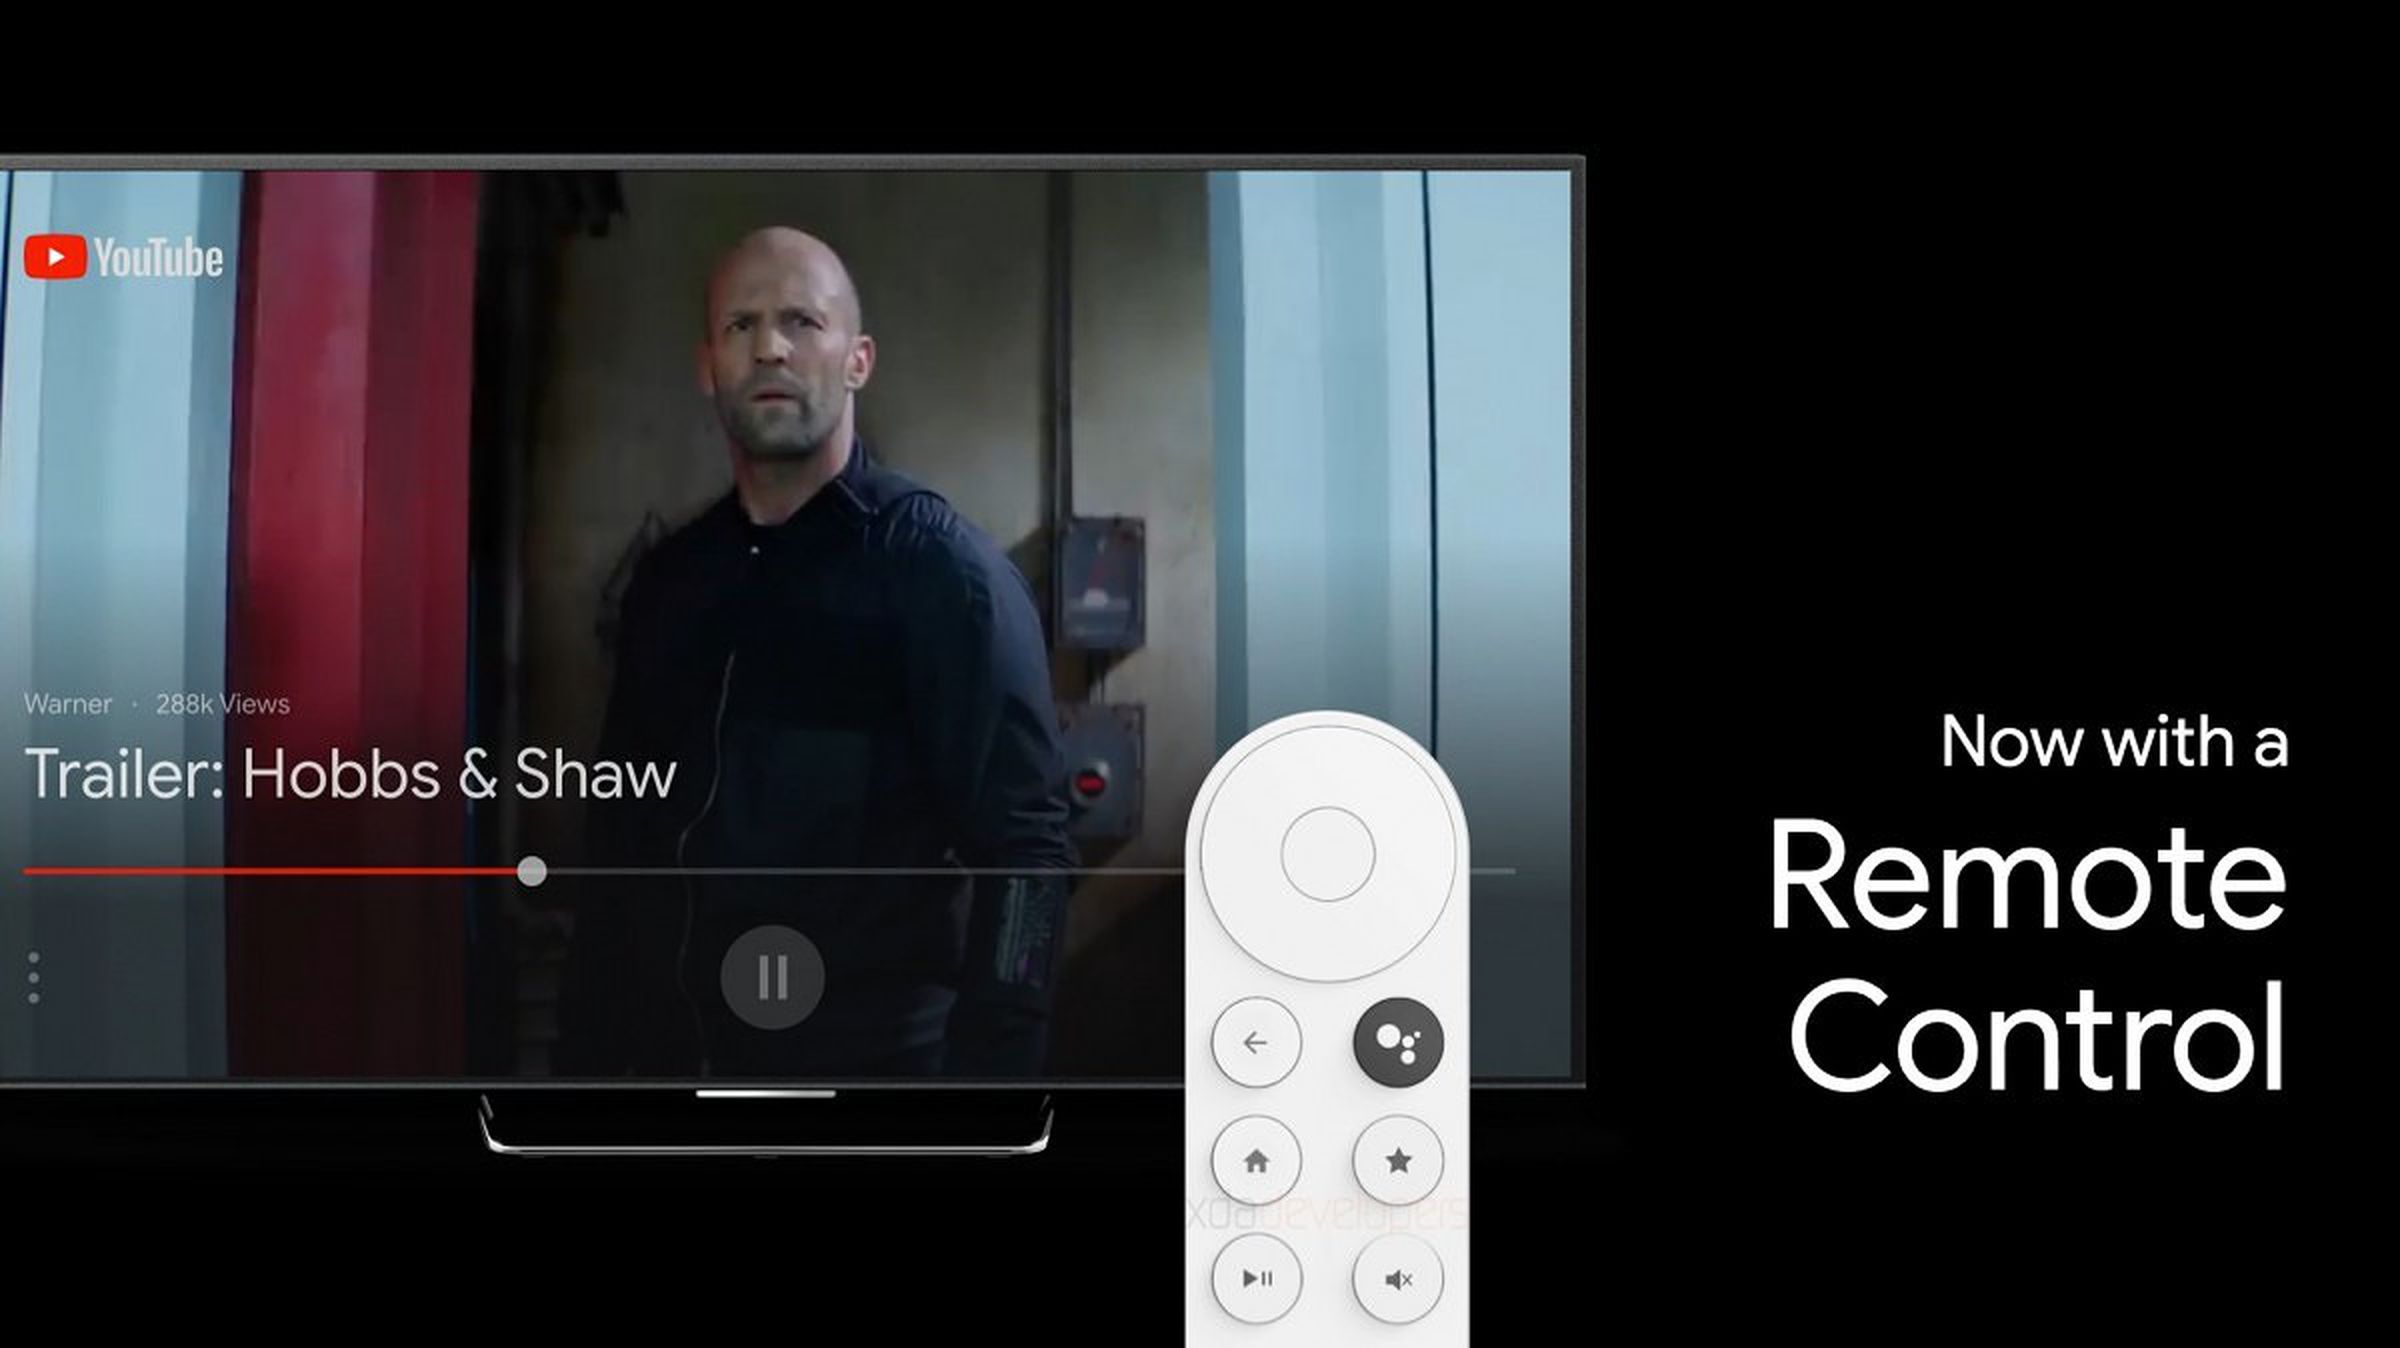 A screenshot showing the new remote control